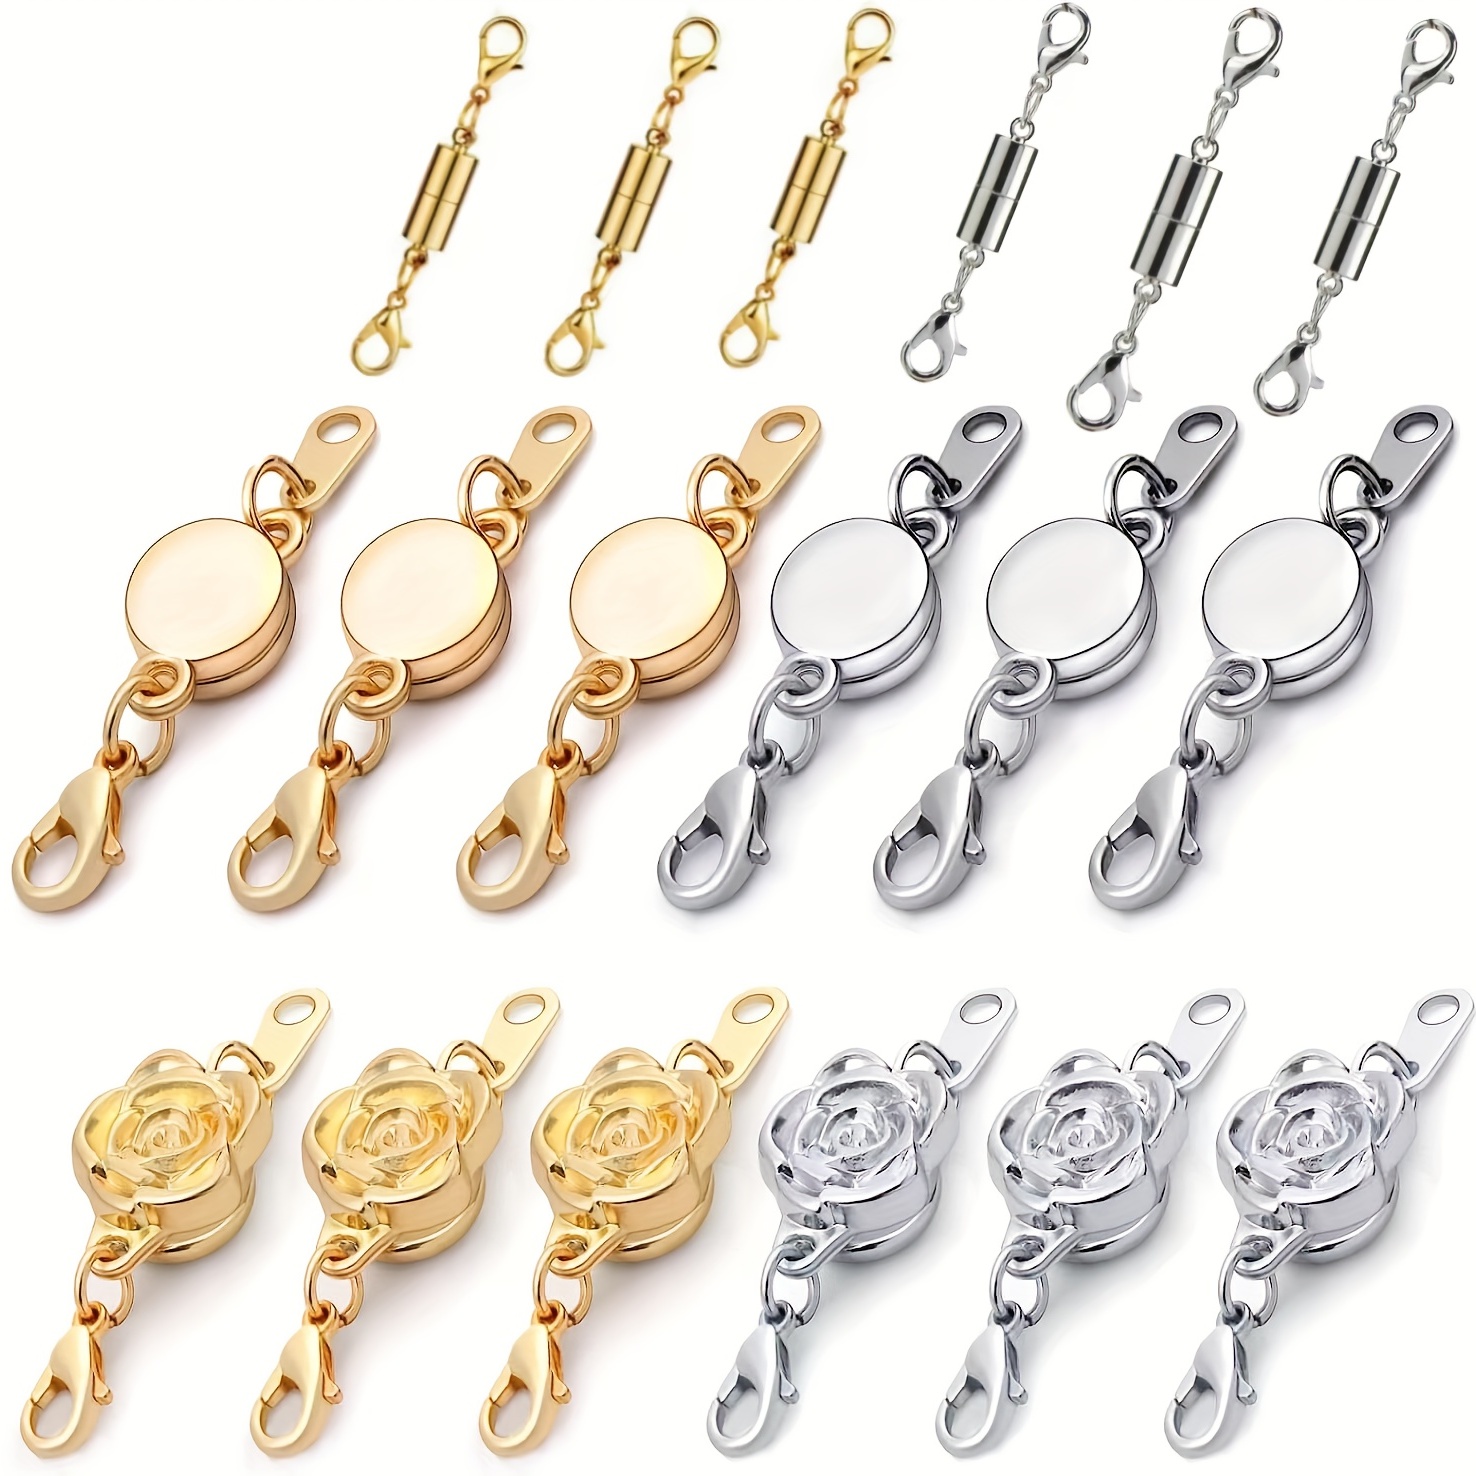 chain clasp types